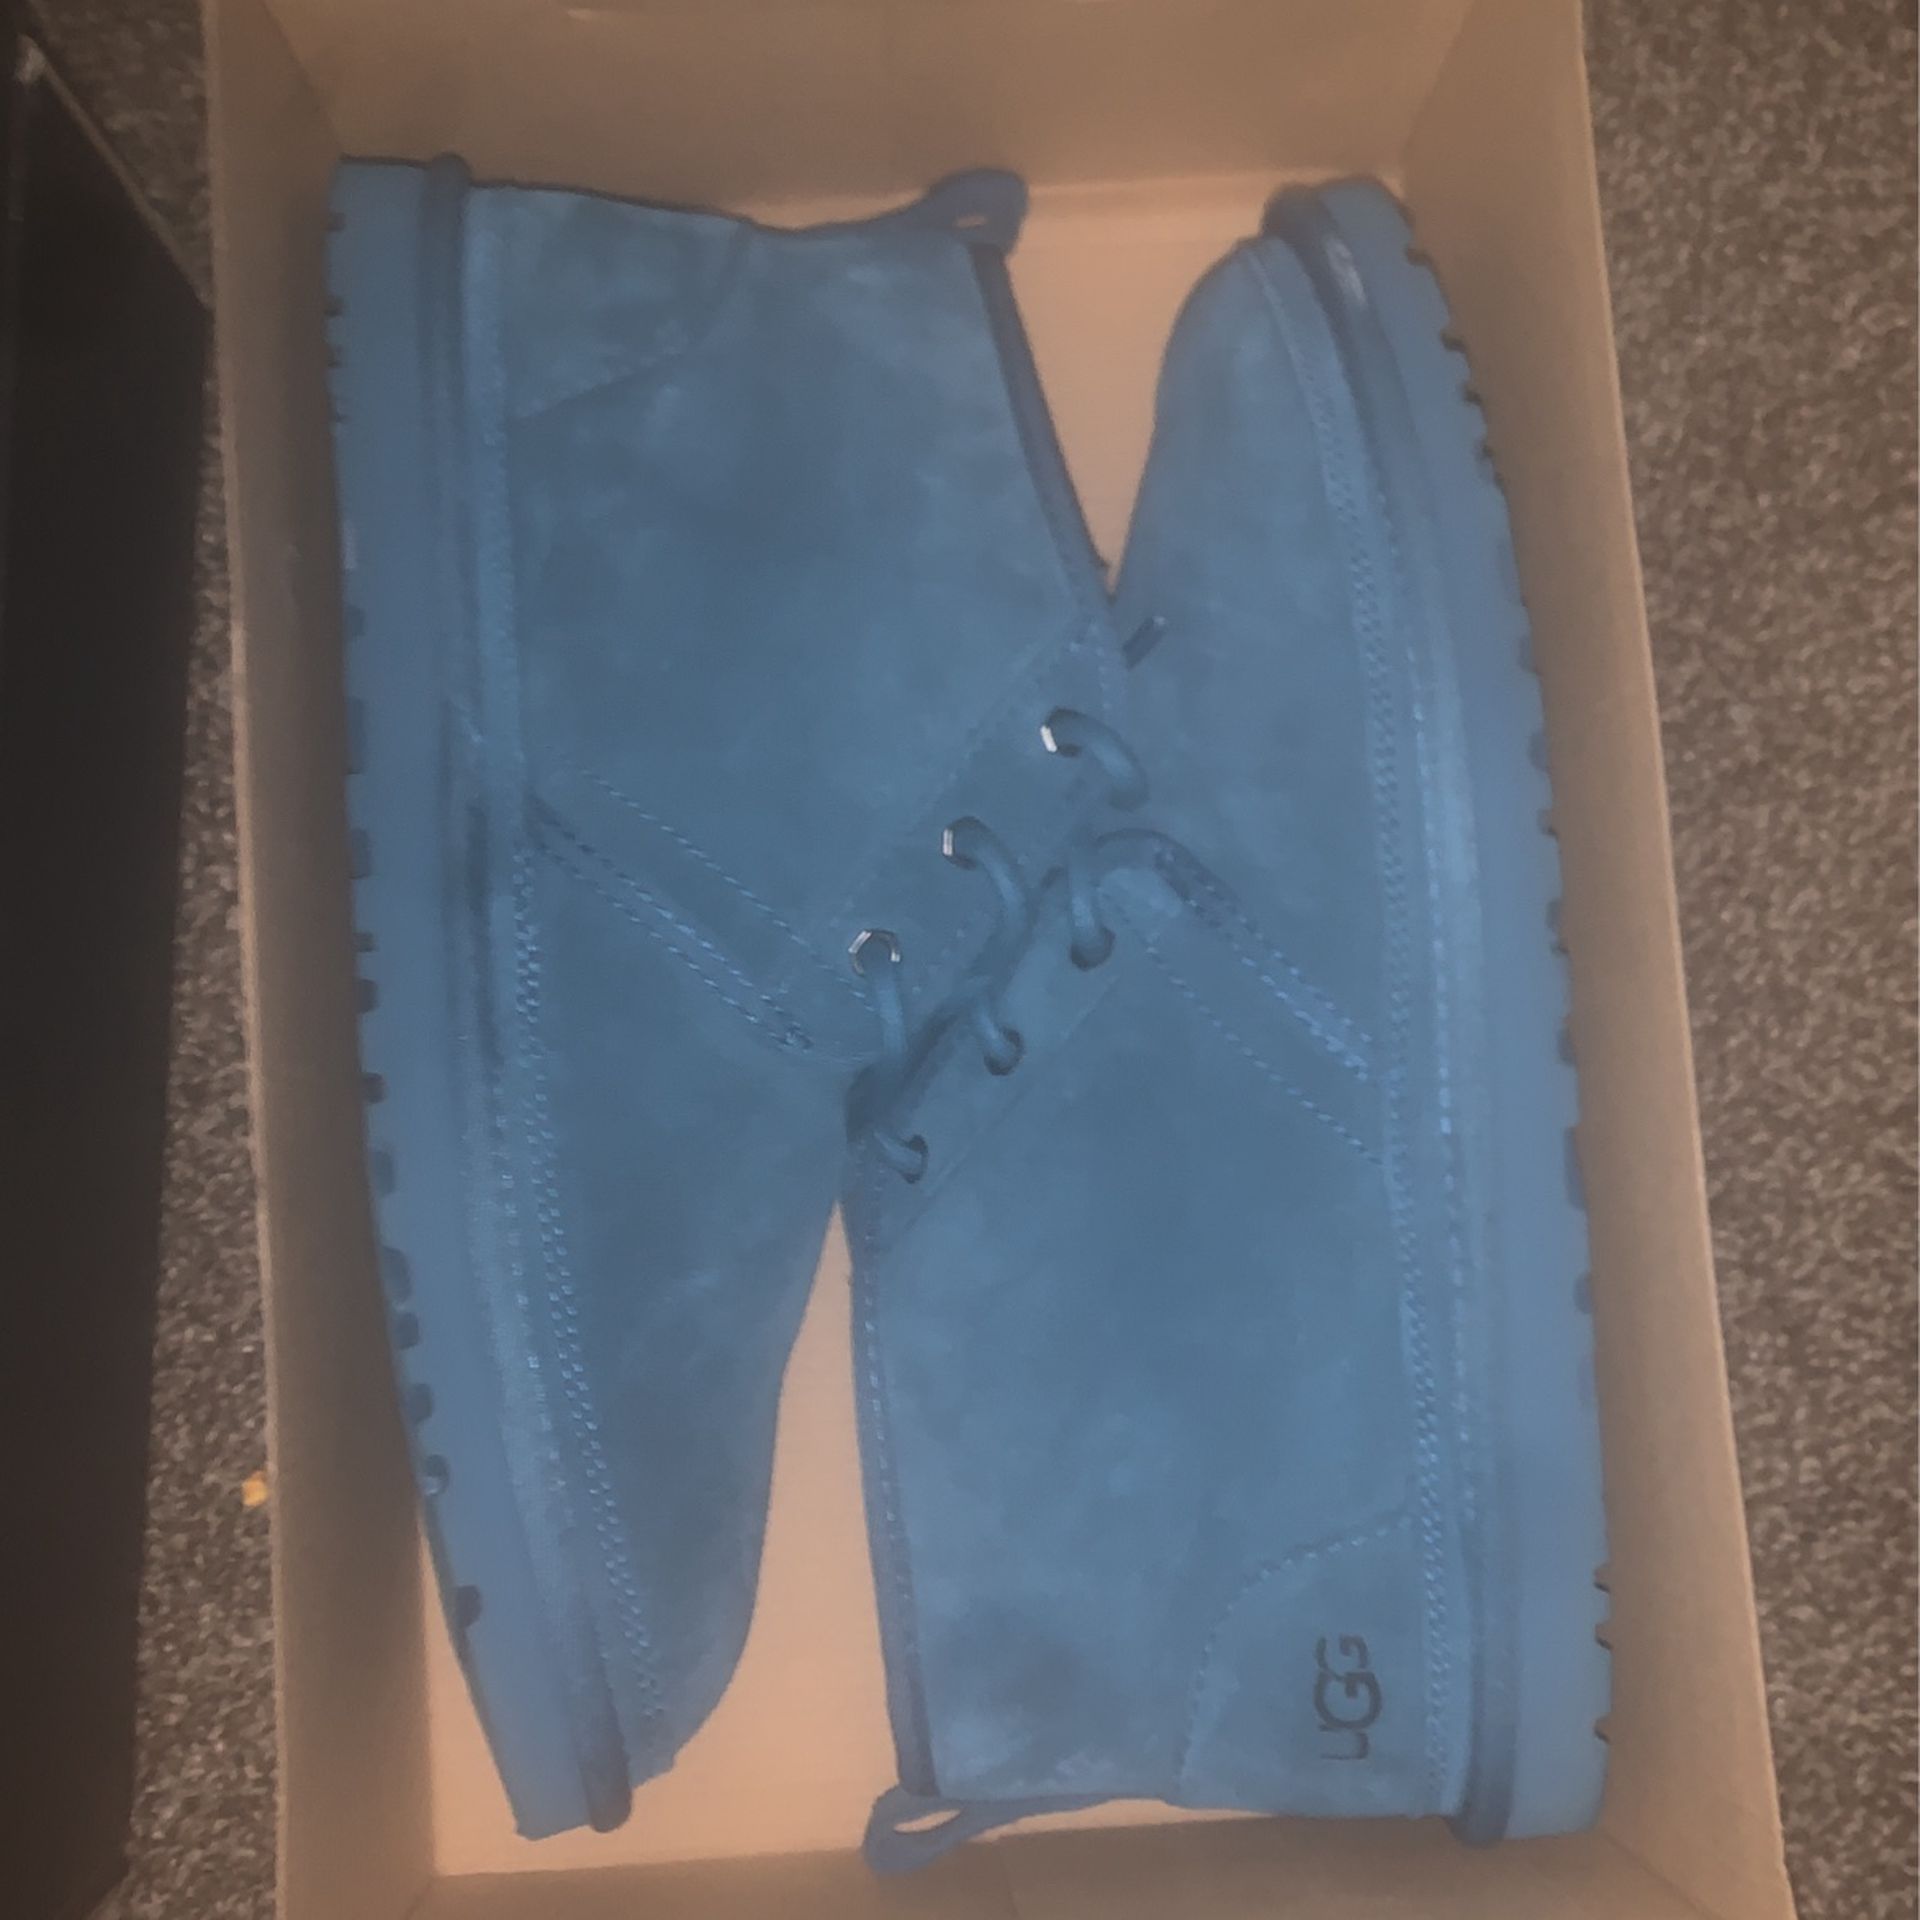 Size 11 Ugg’s 